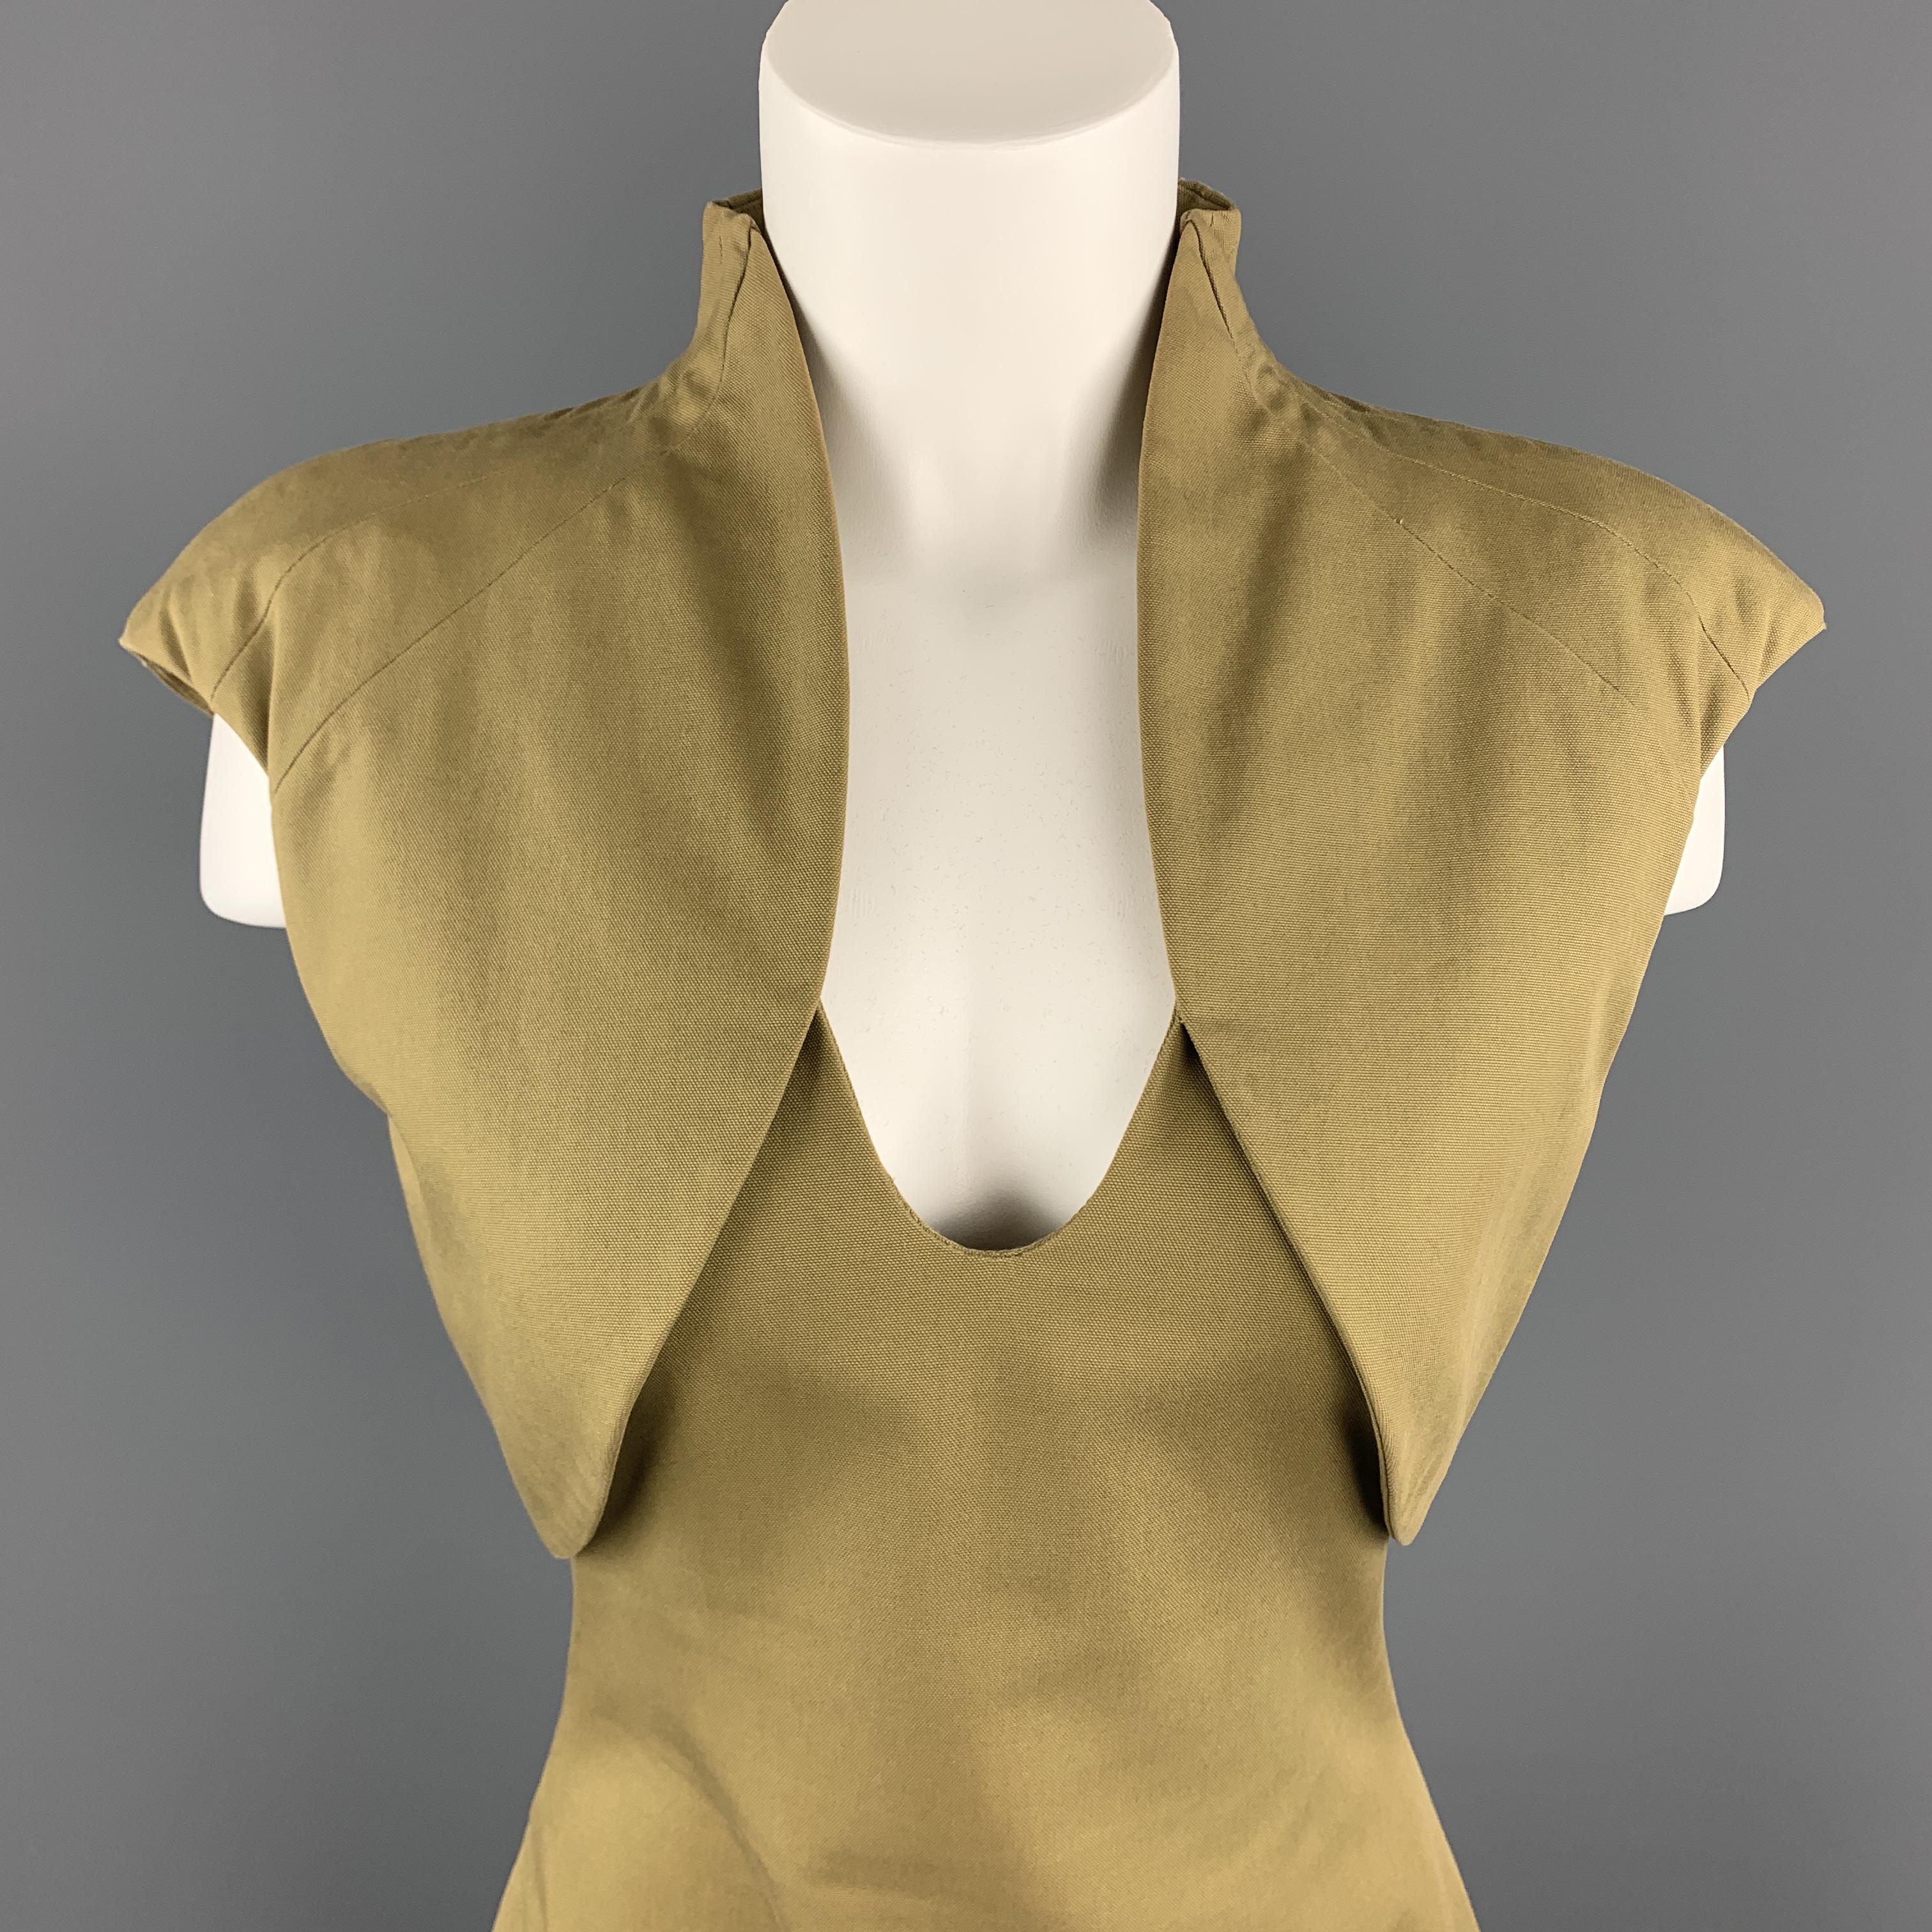 Archive ALEXANDER MCQUEEN dress come sin muted olive khaki green cotton canvas with a V neck, and padded, high collar, bolero style top. 

Excellent Pre-Owned Condition.
Marked: IT 42

Measurements:

Shoulder: 19 in.
Bust: 37 in.
Waist: 29 in.
Hip: